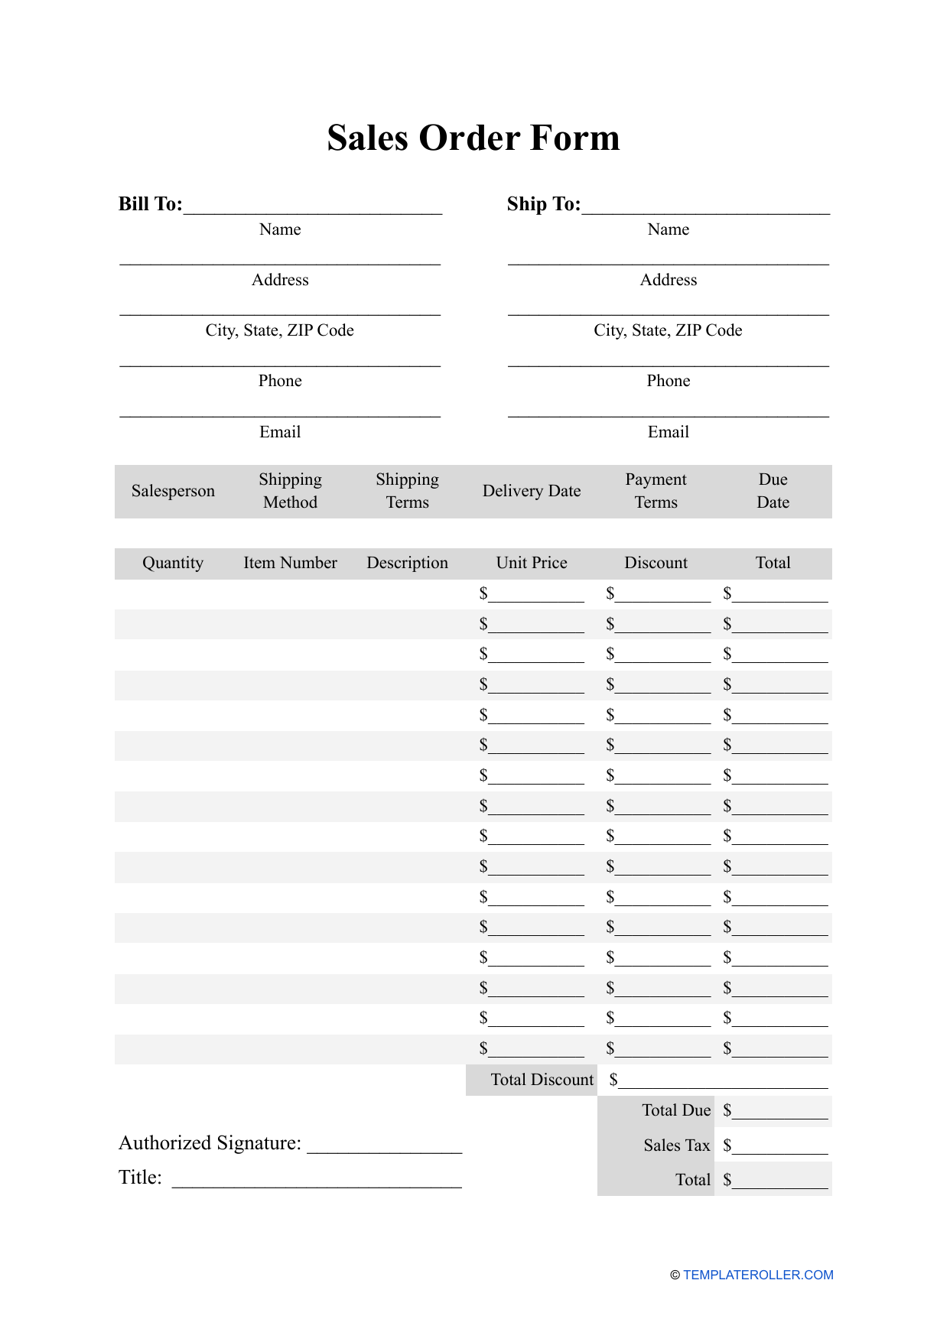 Sales Order Form Template, Page 1